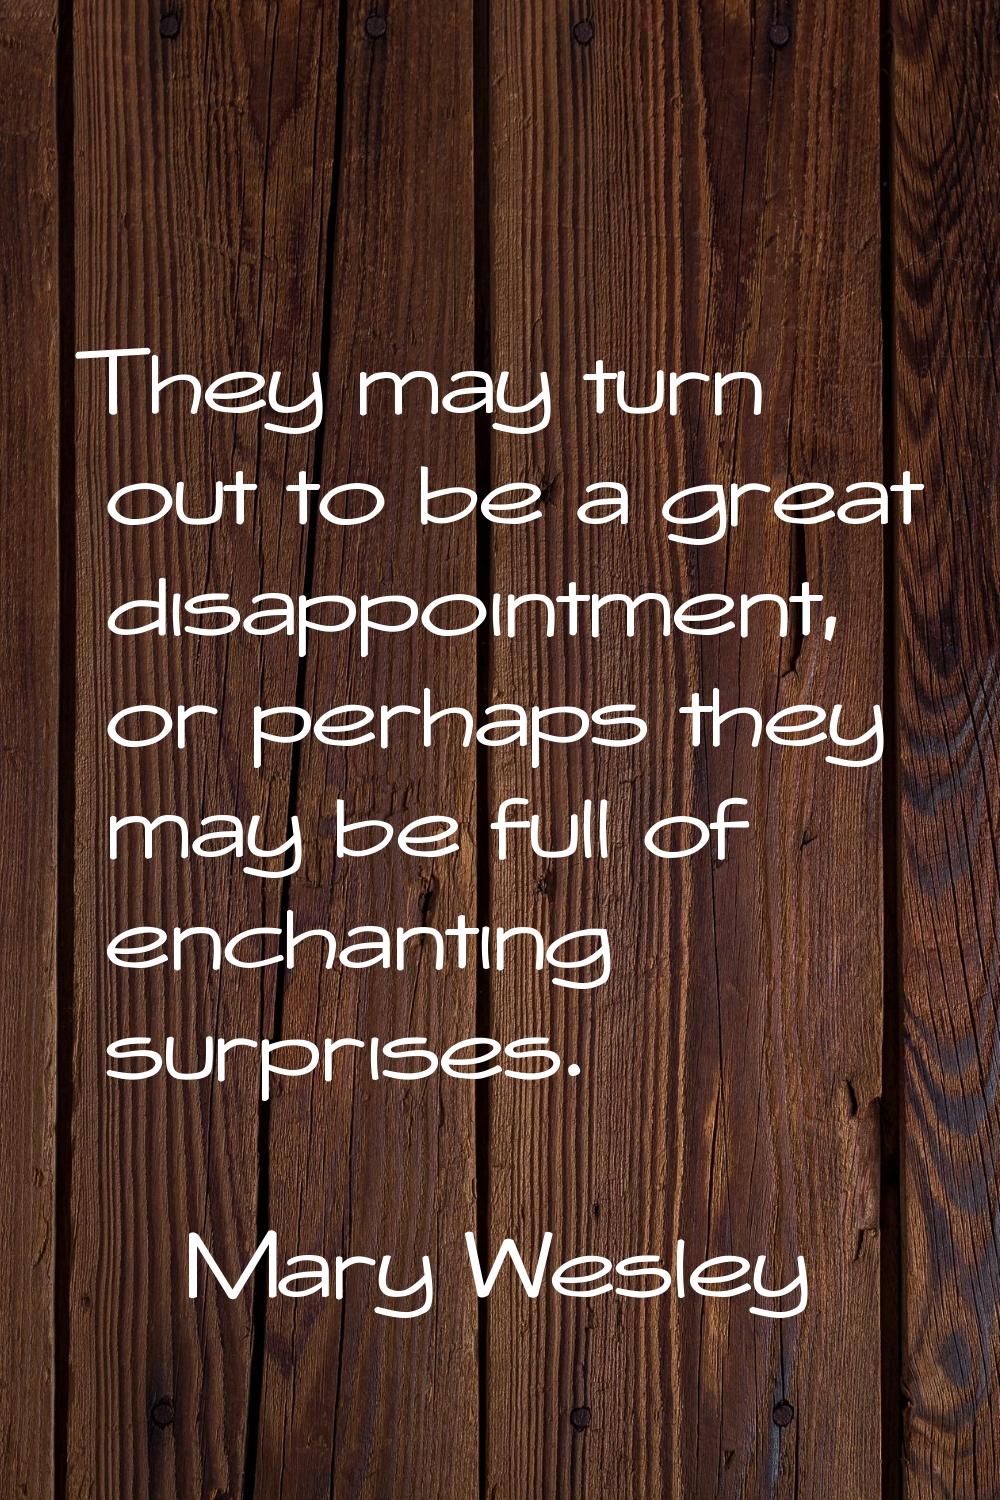 They may turn out to be a great disappointment, or perhaps they may be full of enchanting surprises